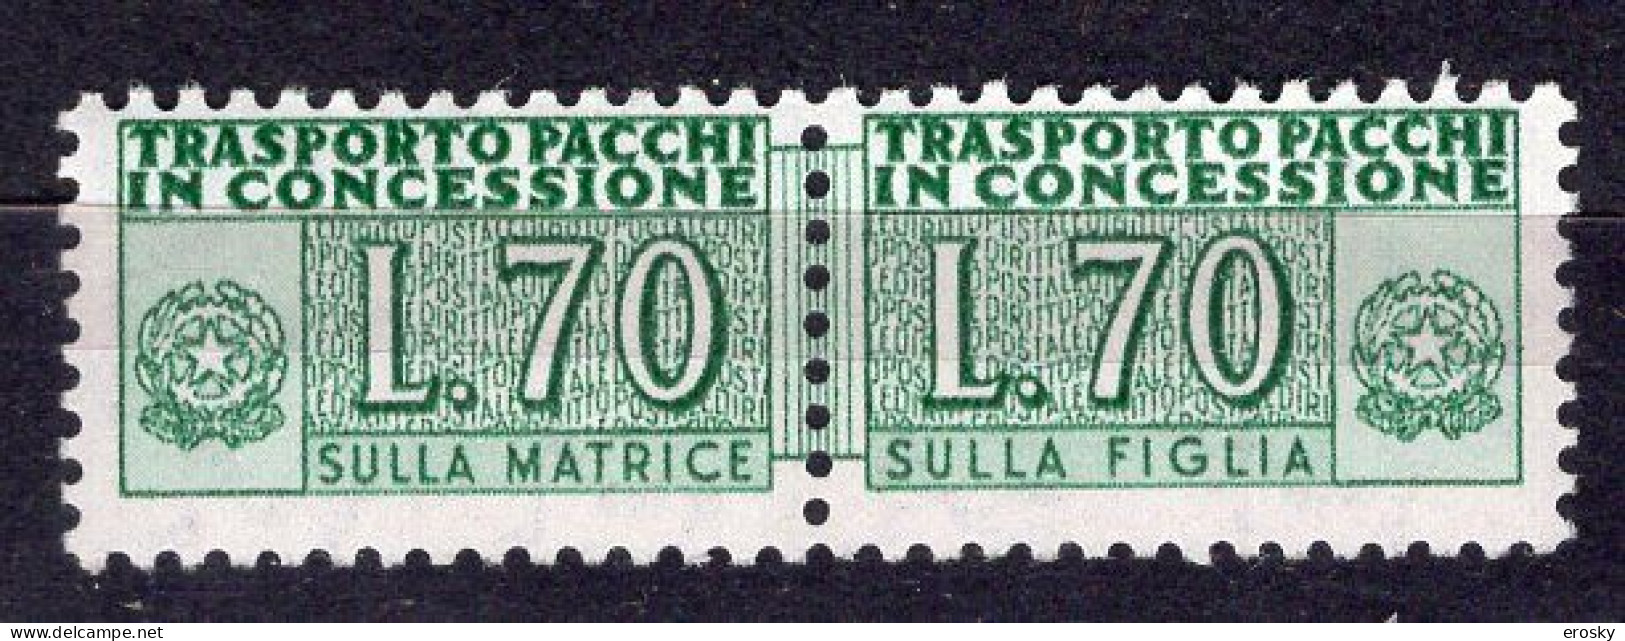 Y6265 - ITALIA PACCHI CONCESSIONE Ss N°8 - ITALIE COLIS Yv N°93A ** - Consigned Parcels